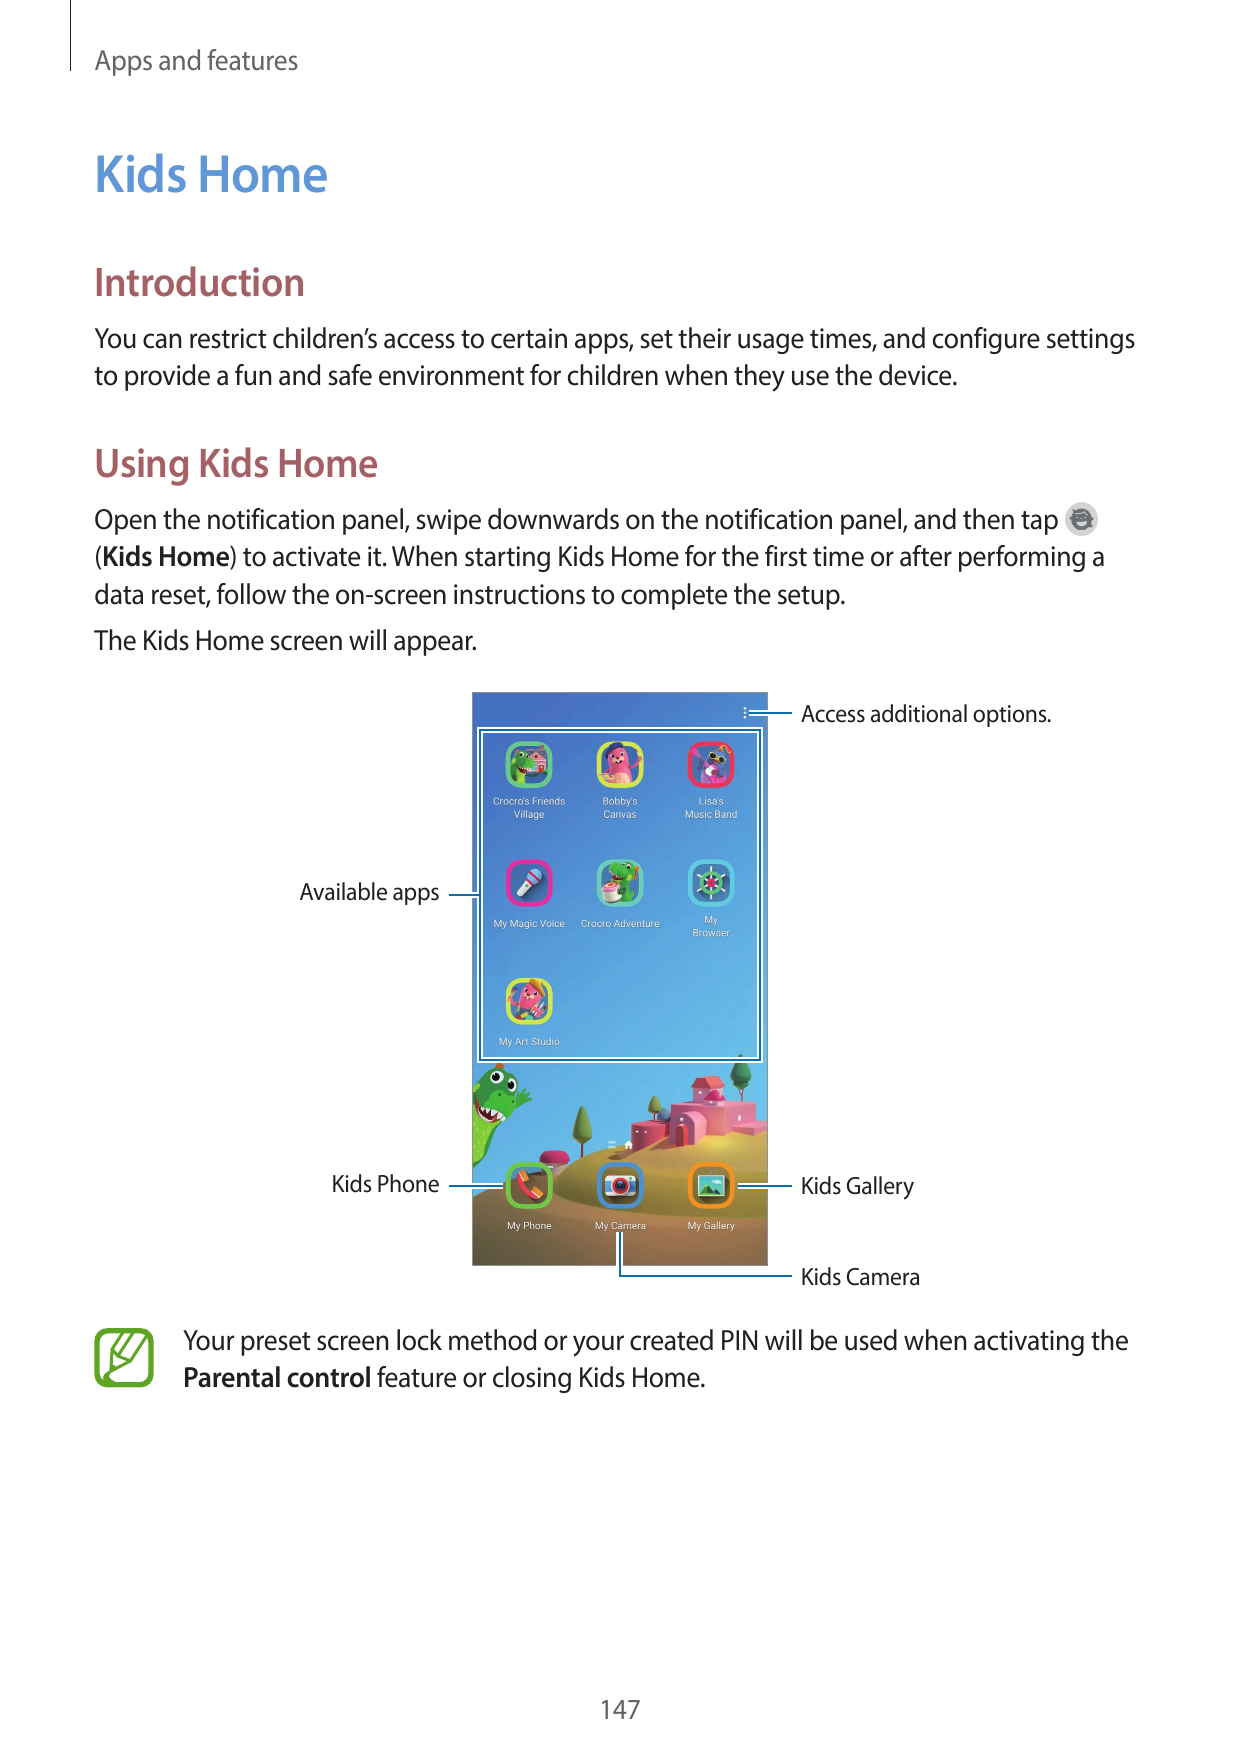 Apps and featuresKids HomeIntroductionYou can restrict children’s access to certain apps, set their usage times, and configure s